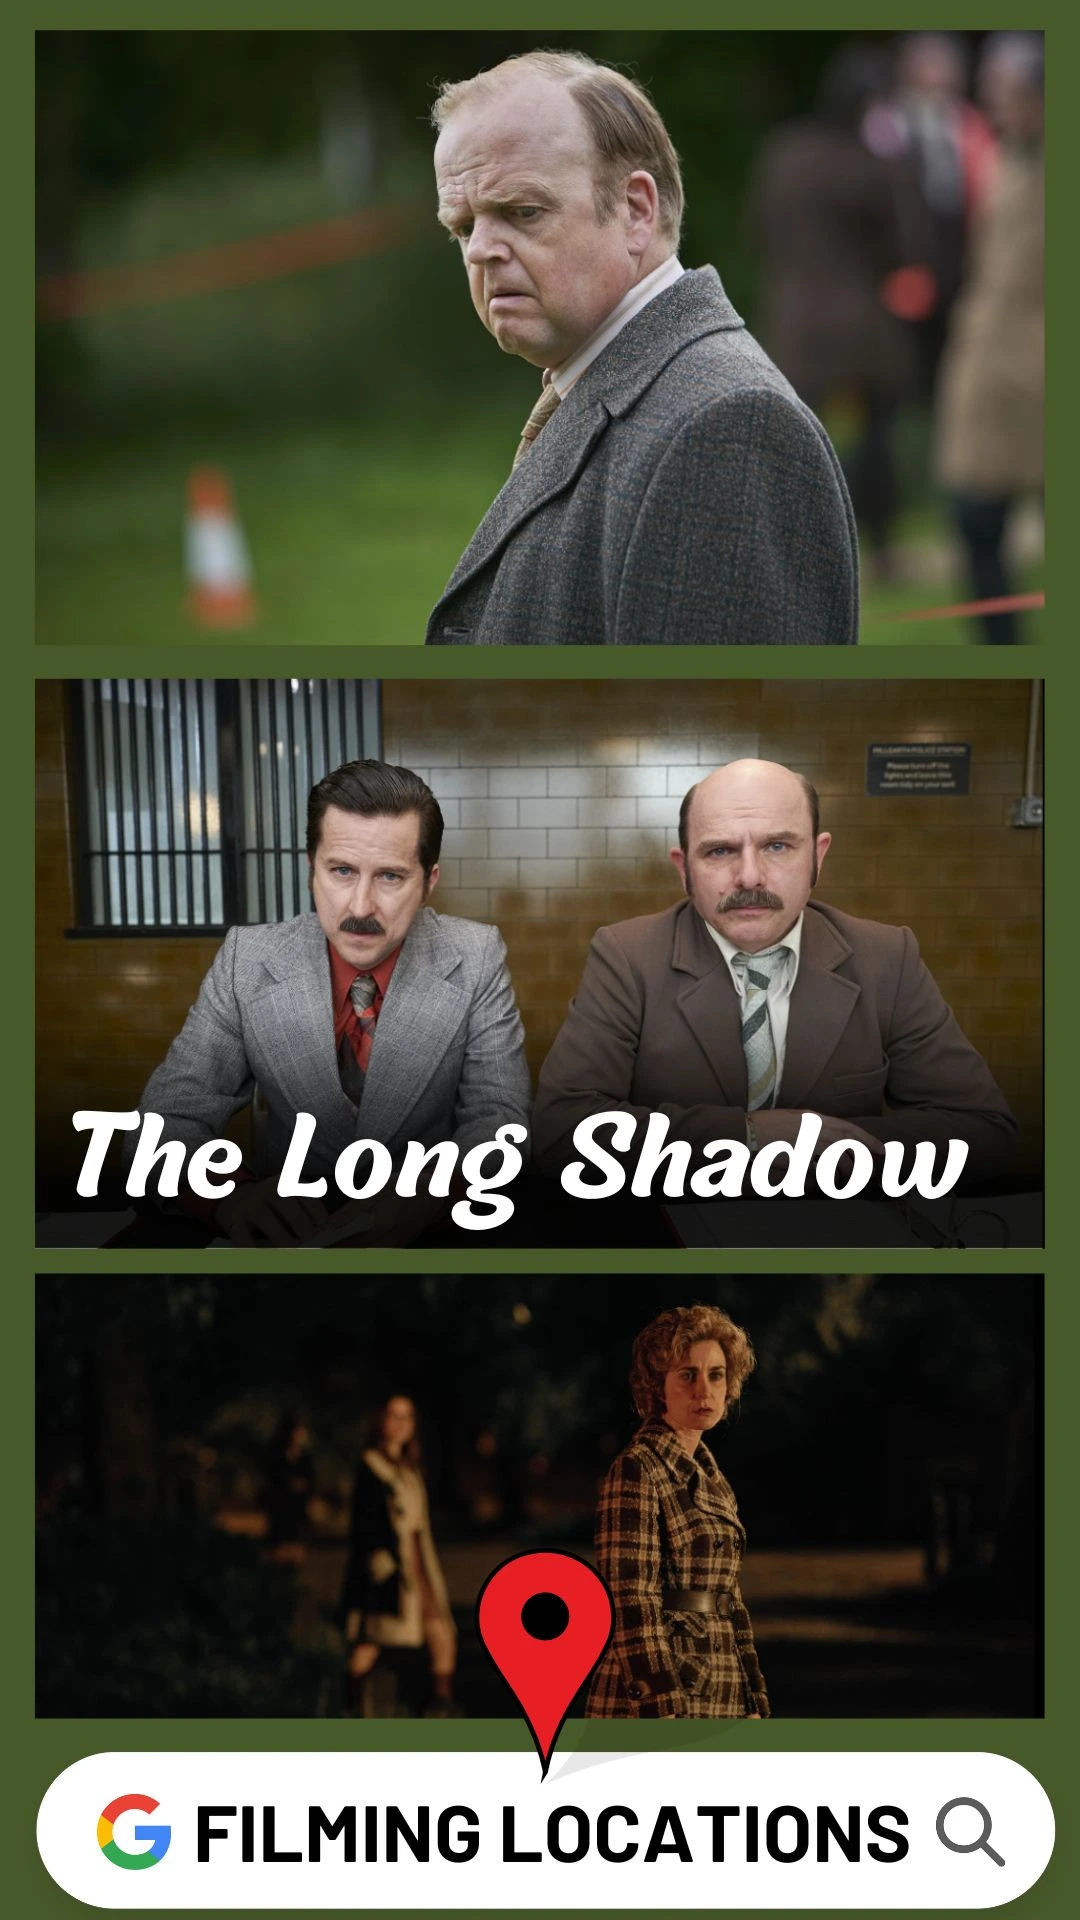 The Long Shadow Filming Locations